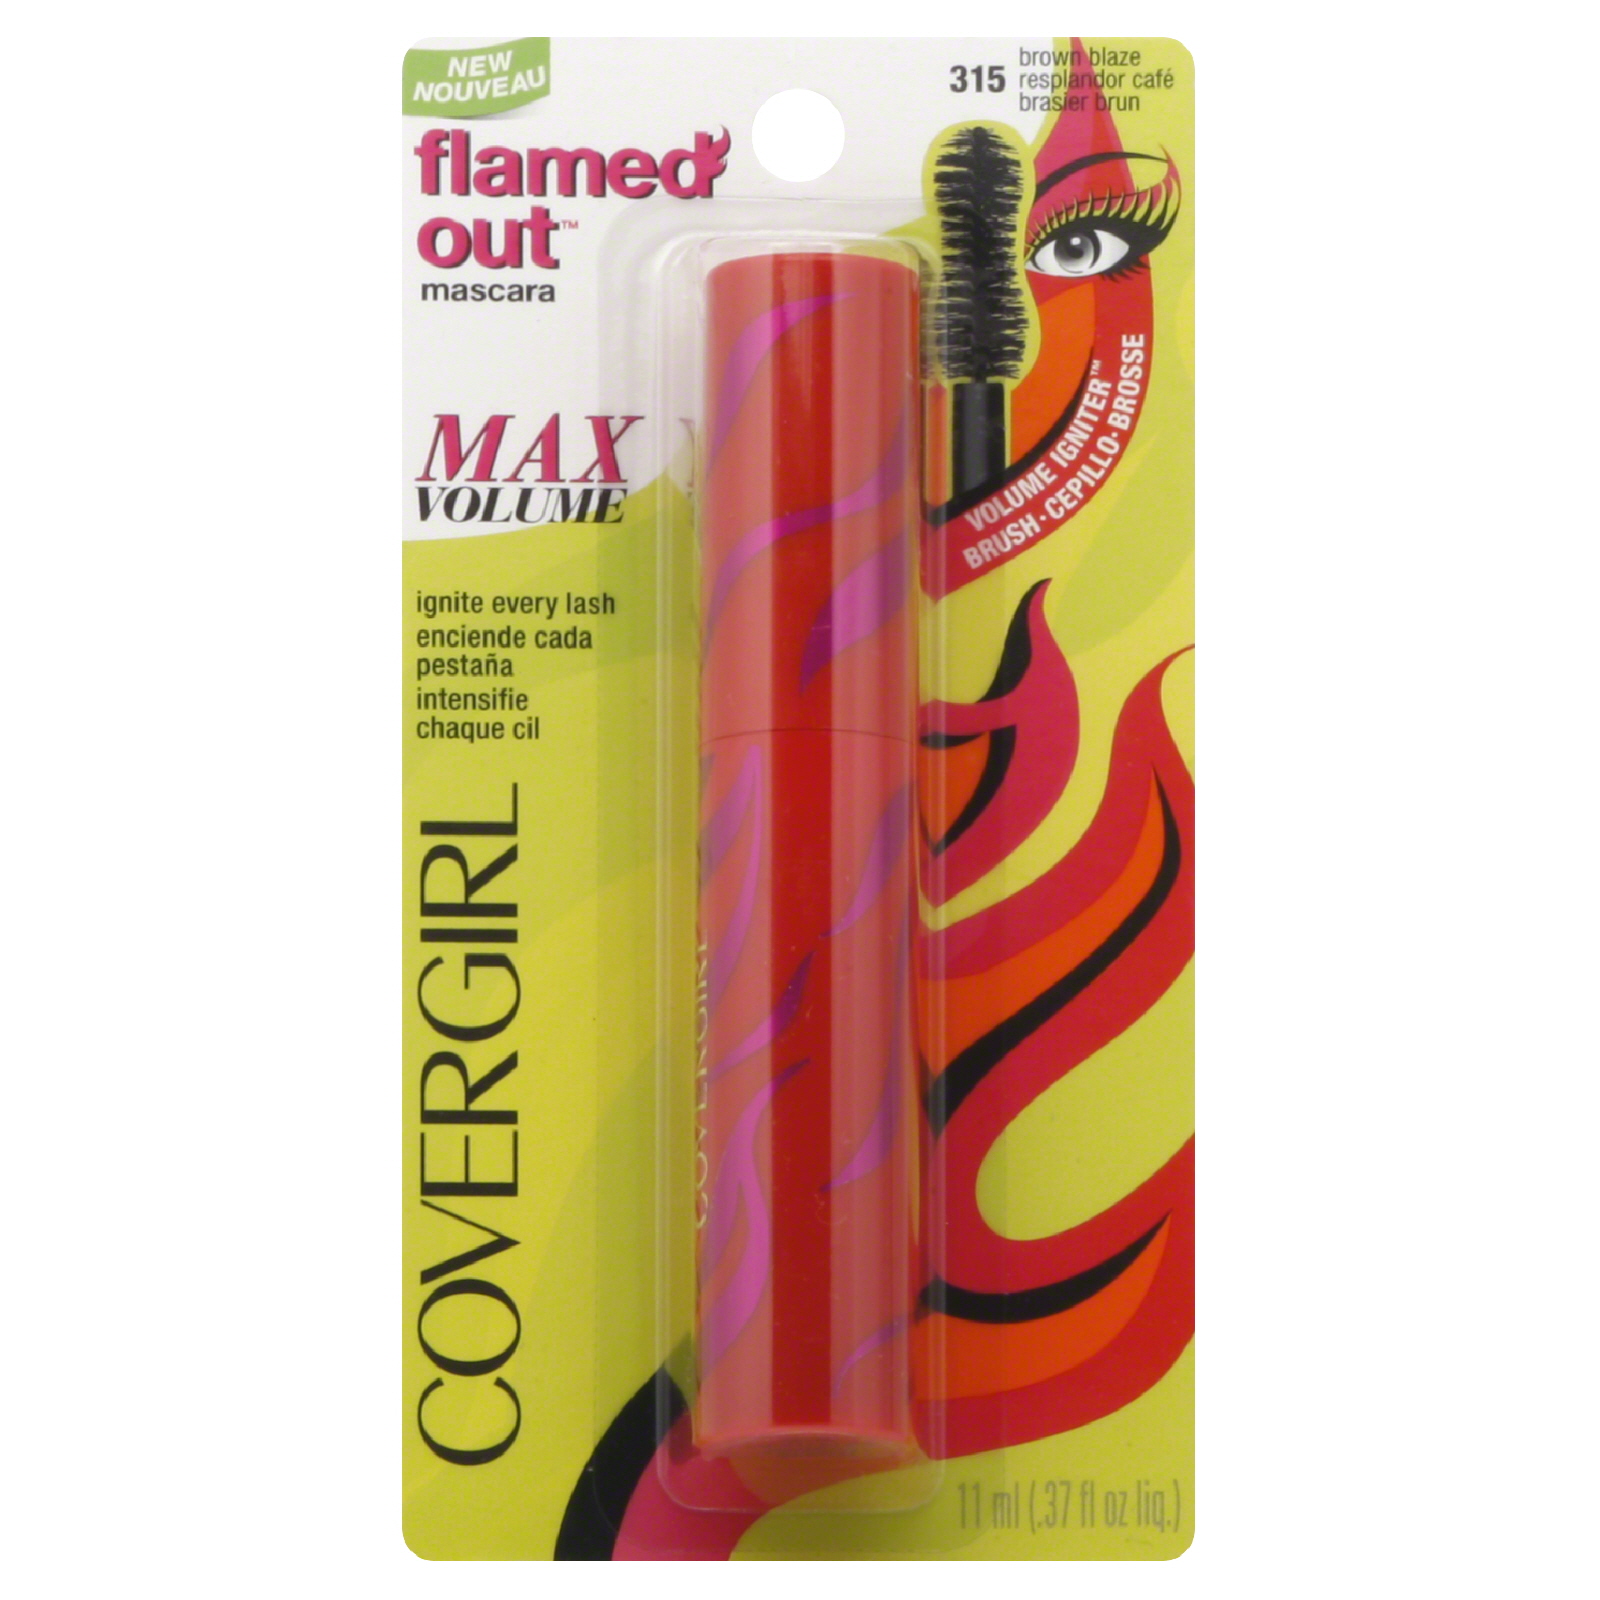 CoverGirl Flamed Out Mascara, 315 Brown Blaze, 0.37 oz